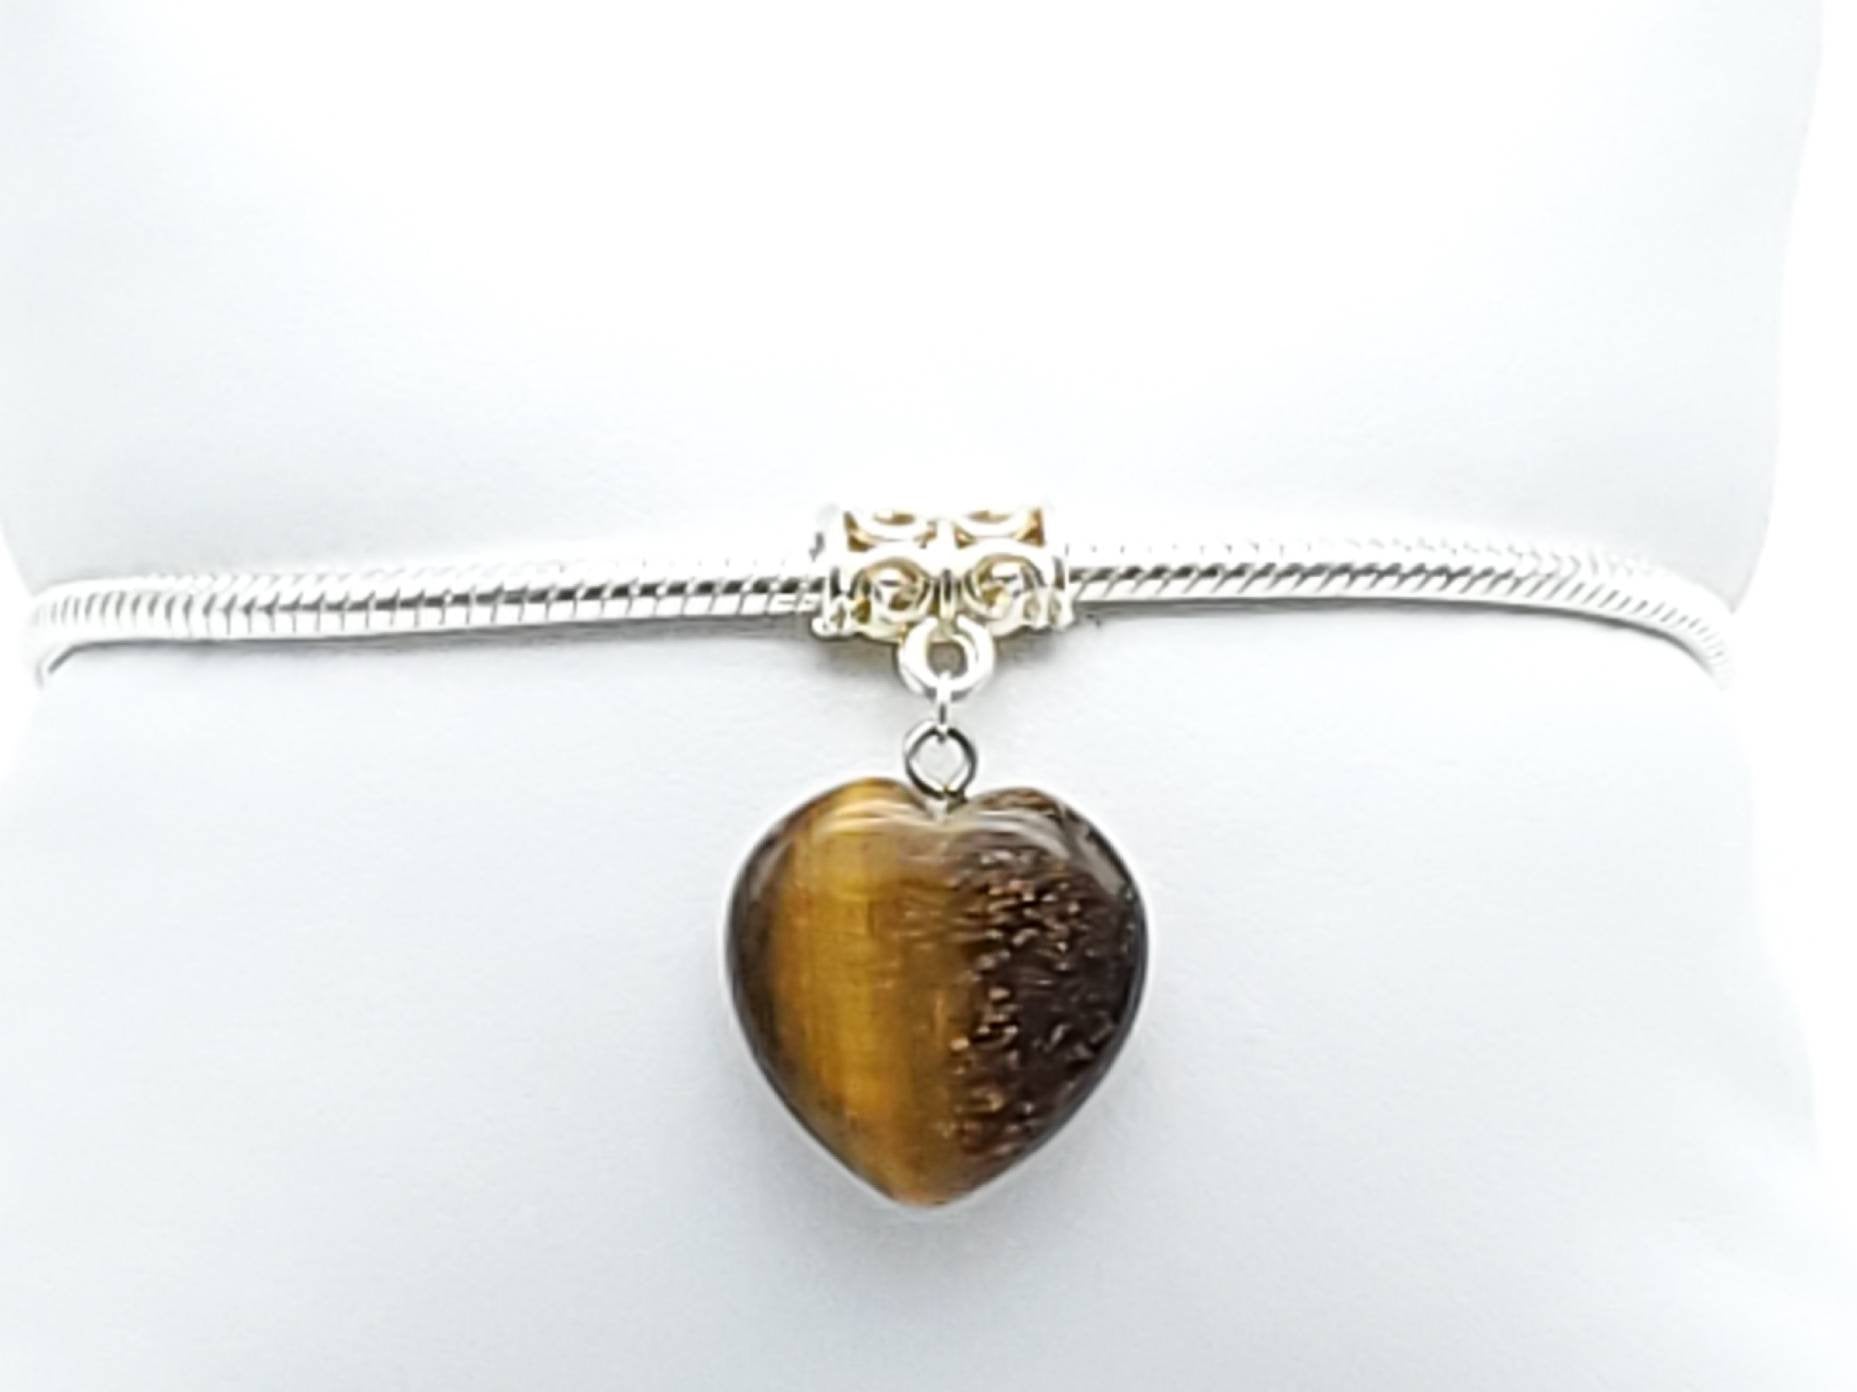 Charm Bracelet with Tiger's Eye Stone Heart - The Caffeinated Raven